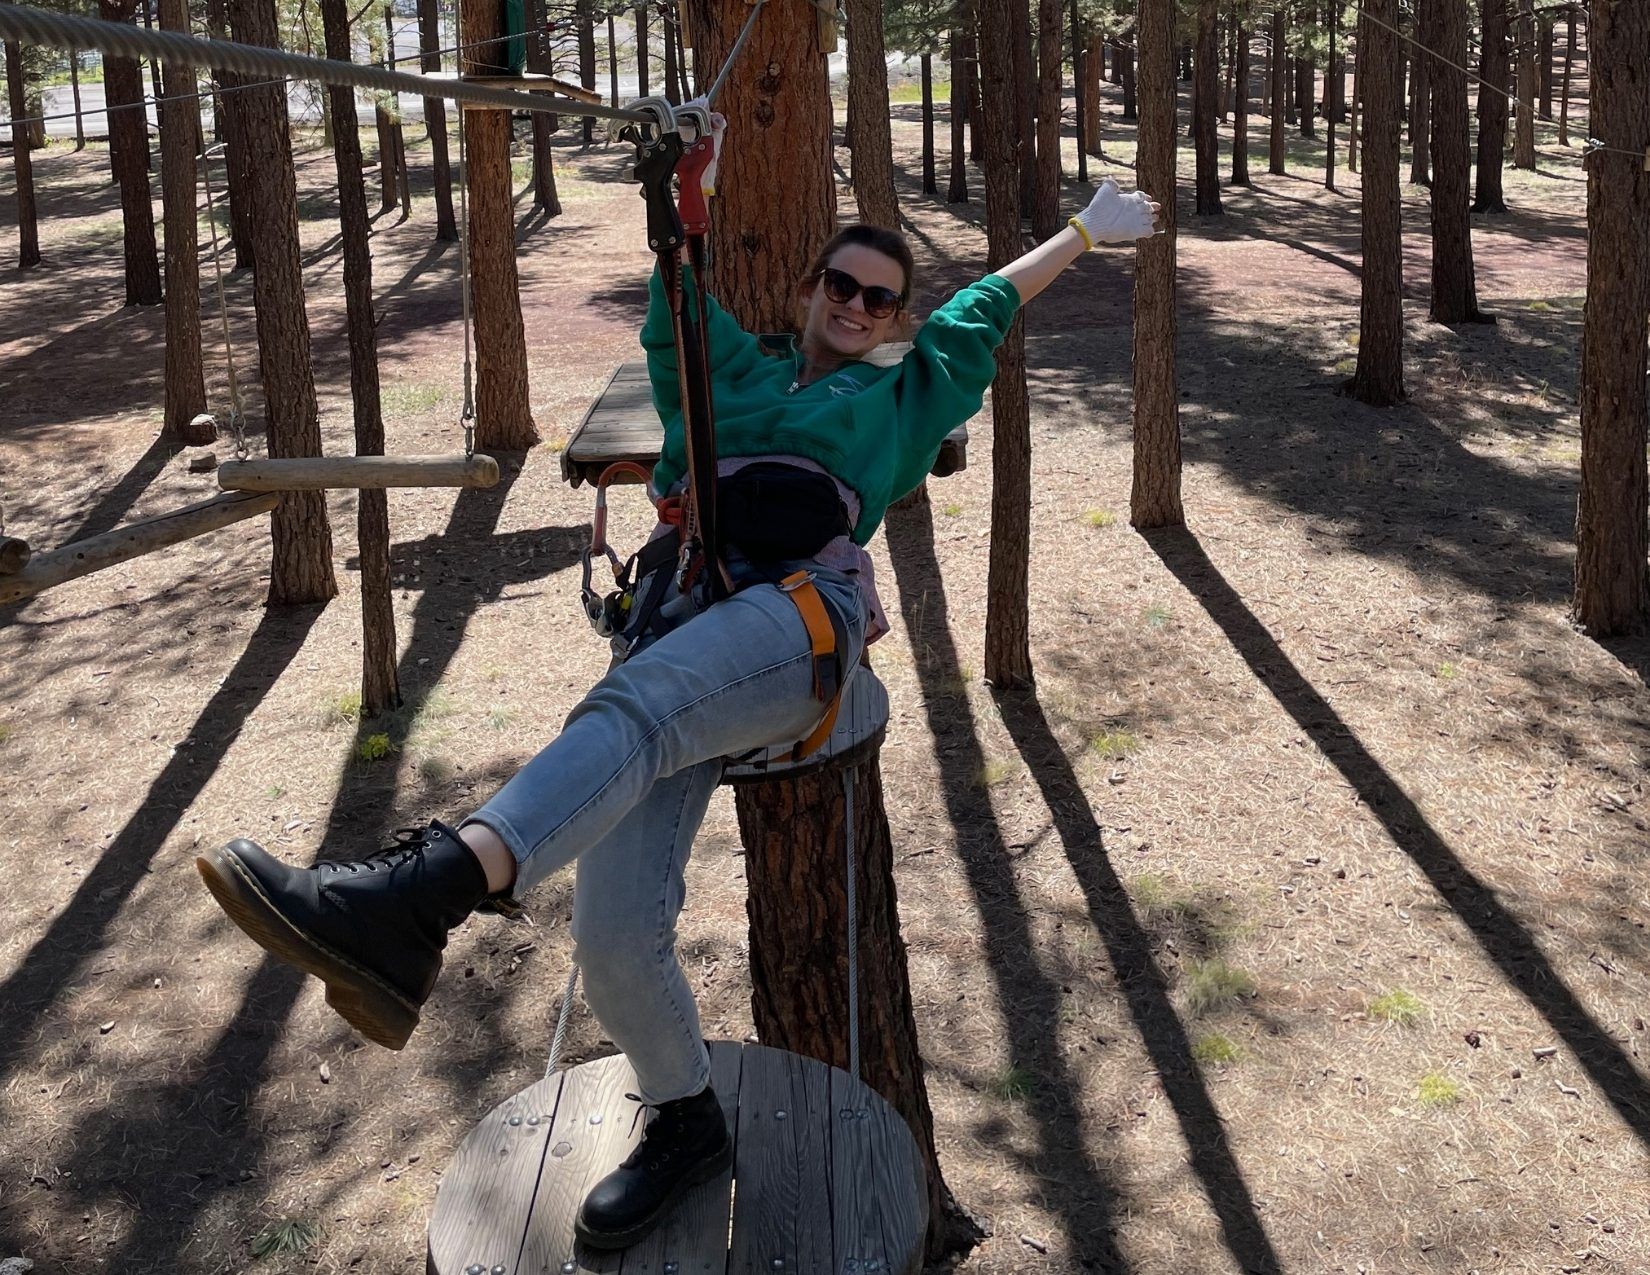 A young woman hanging from an obstacle course attached to Ponderosa Pine trees in Flagstaff, Arizona.